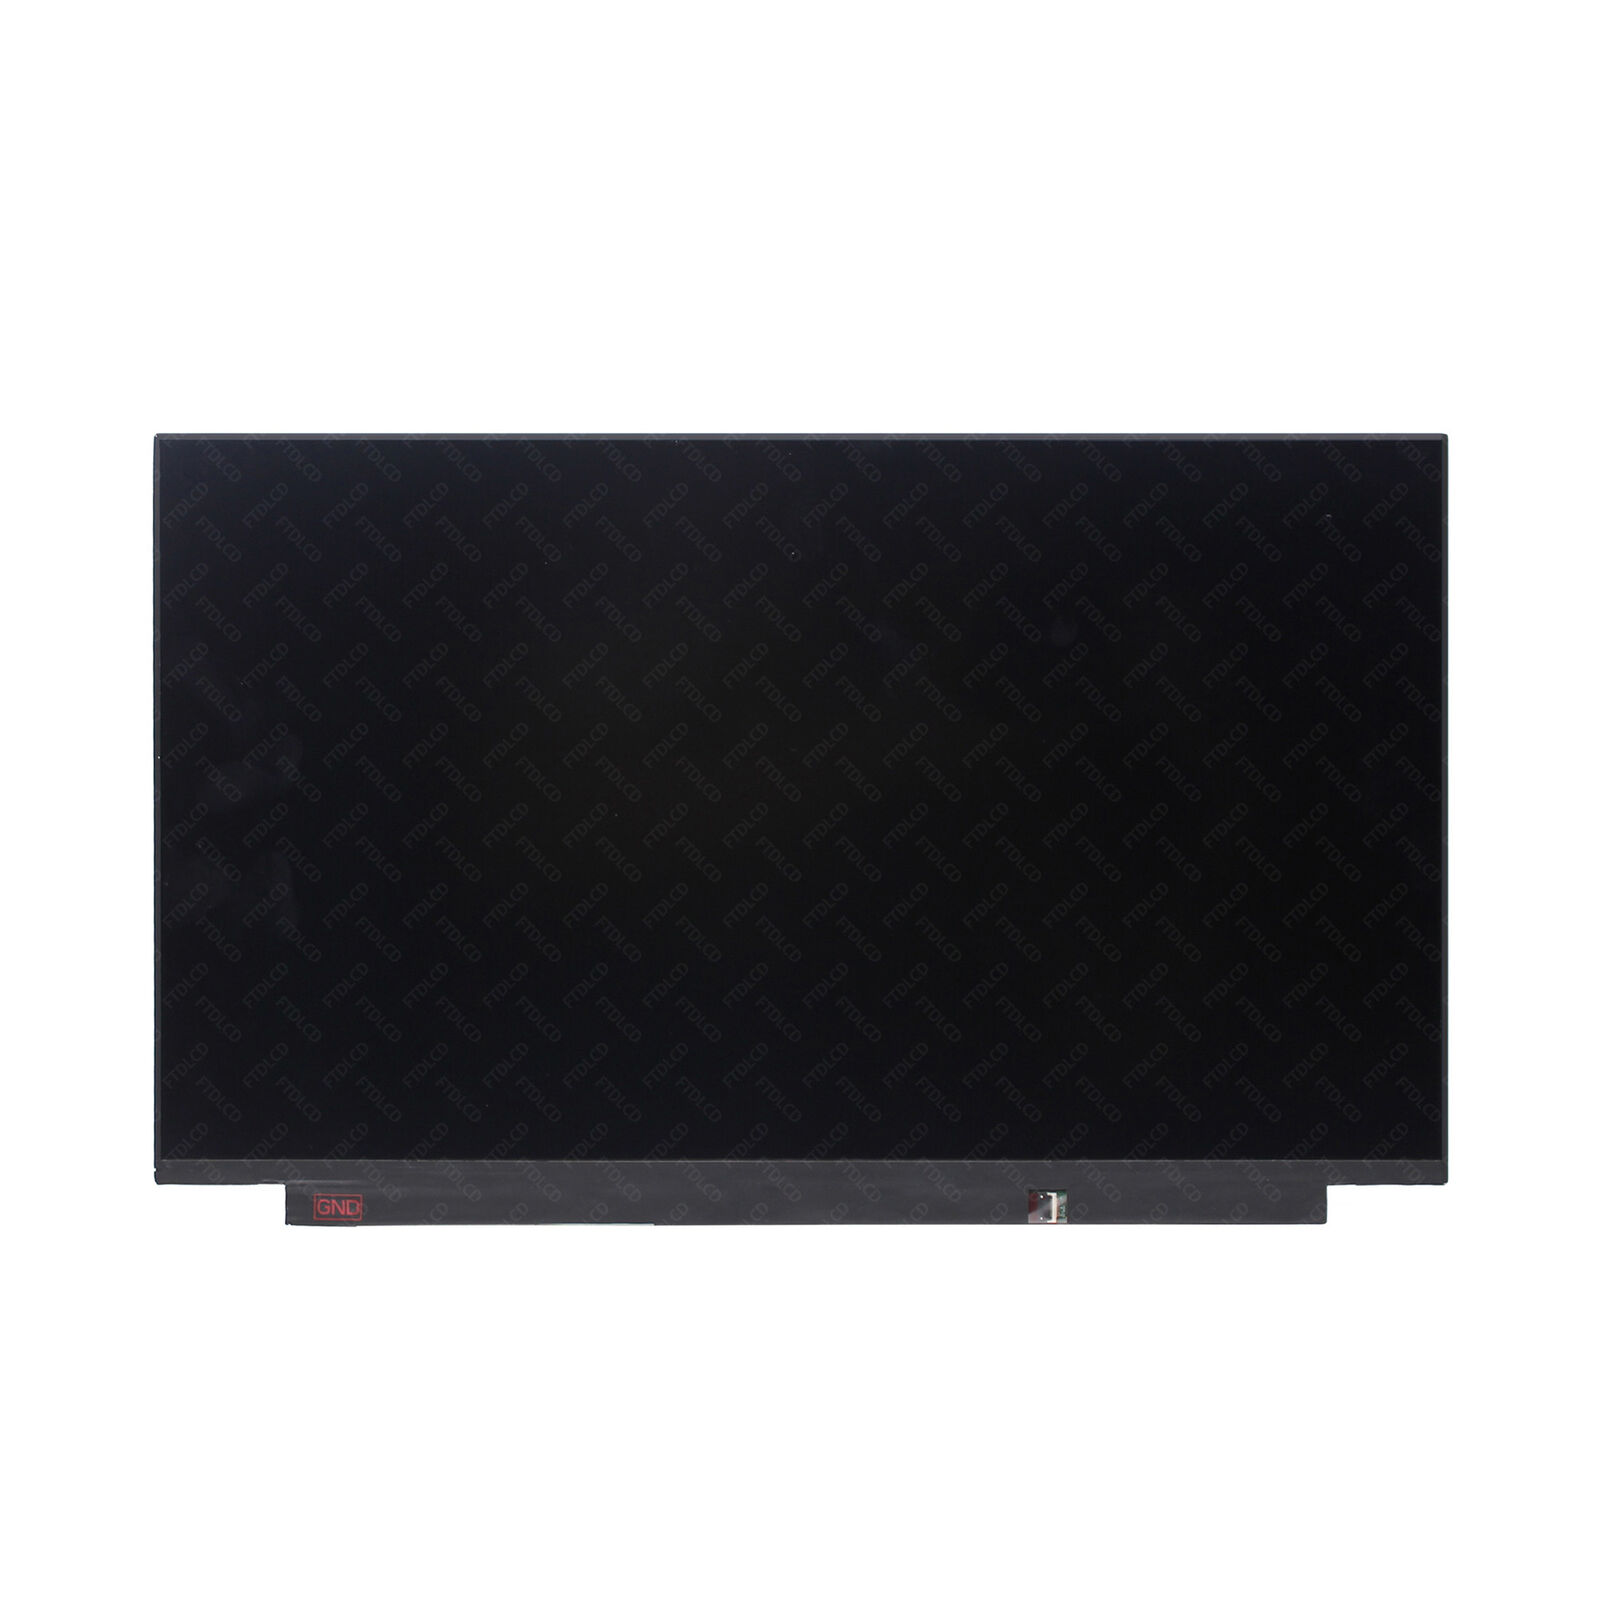 15.6'' FHD LCD Display On-Cell Touch Screen NV156FHM-T01 V8.0 BOE0780 40 pins